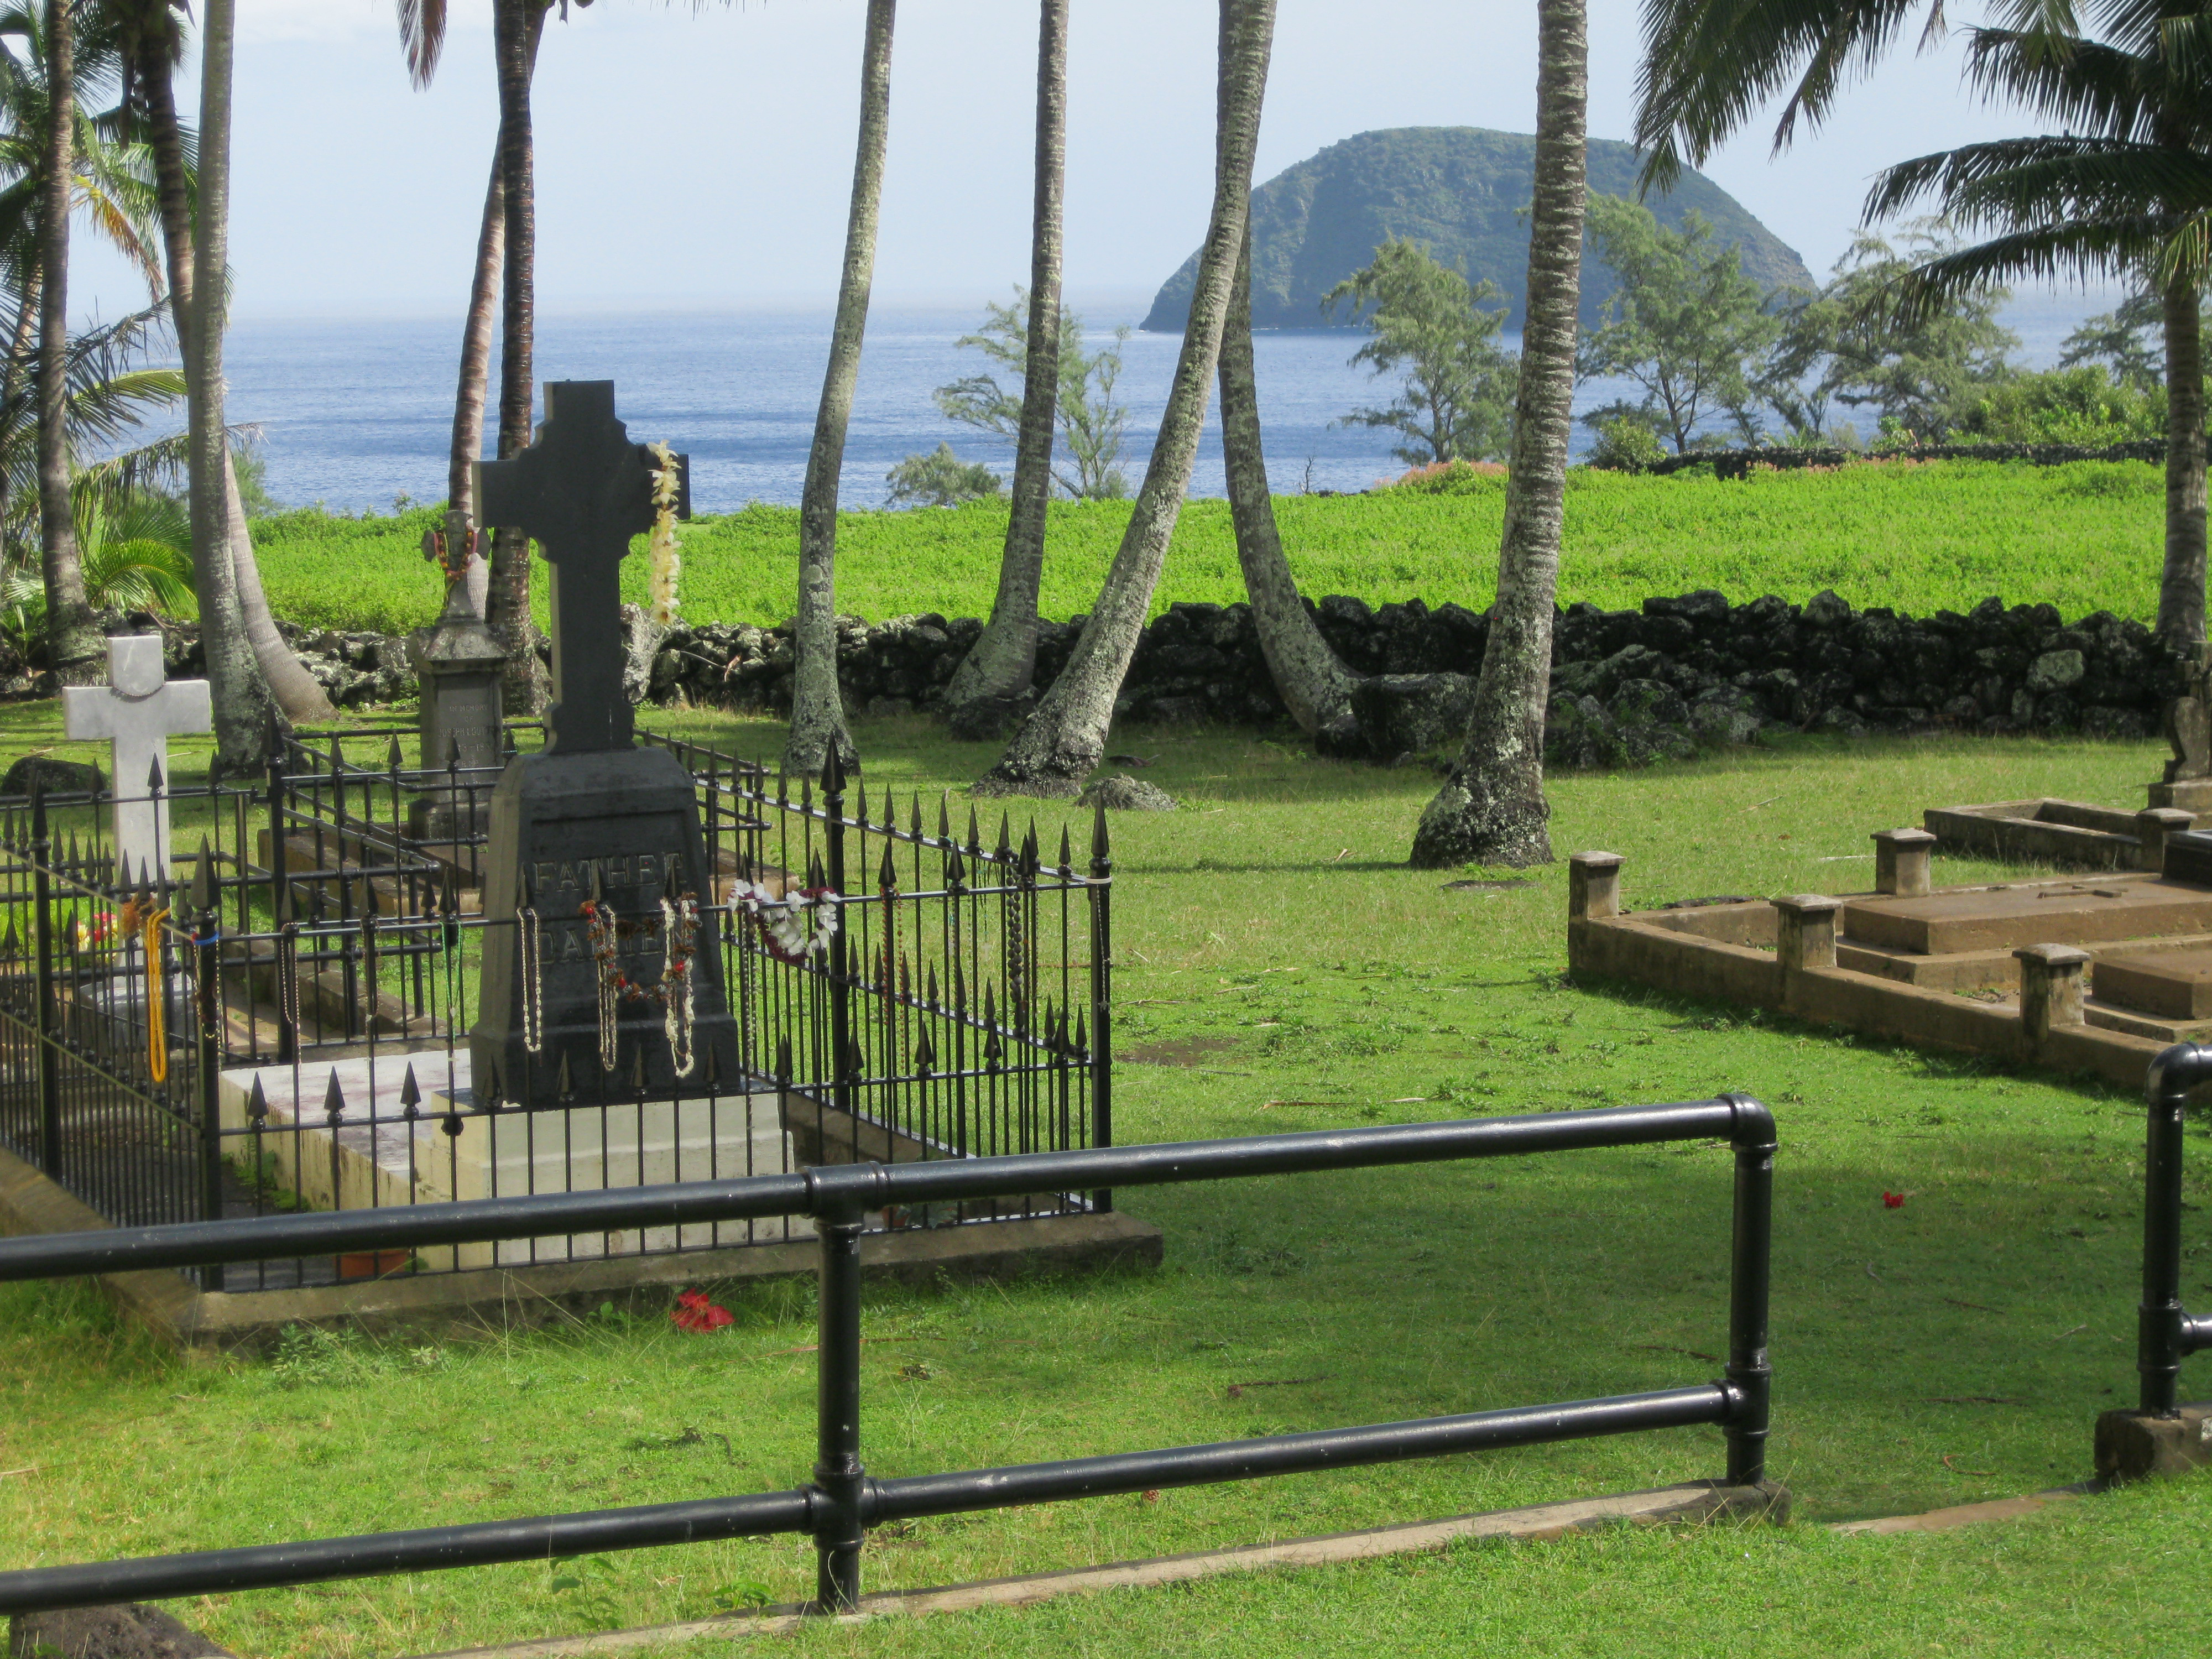 View of St. Damien's Grave at Kalawao with ocean in background.